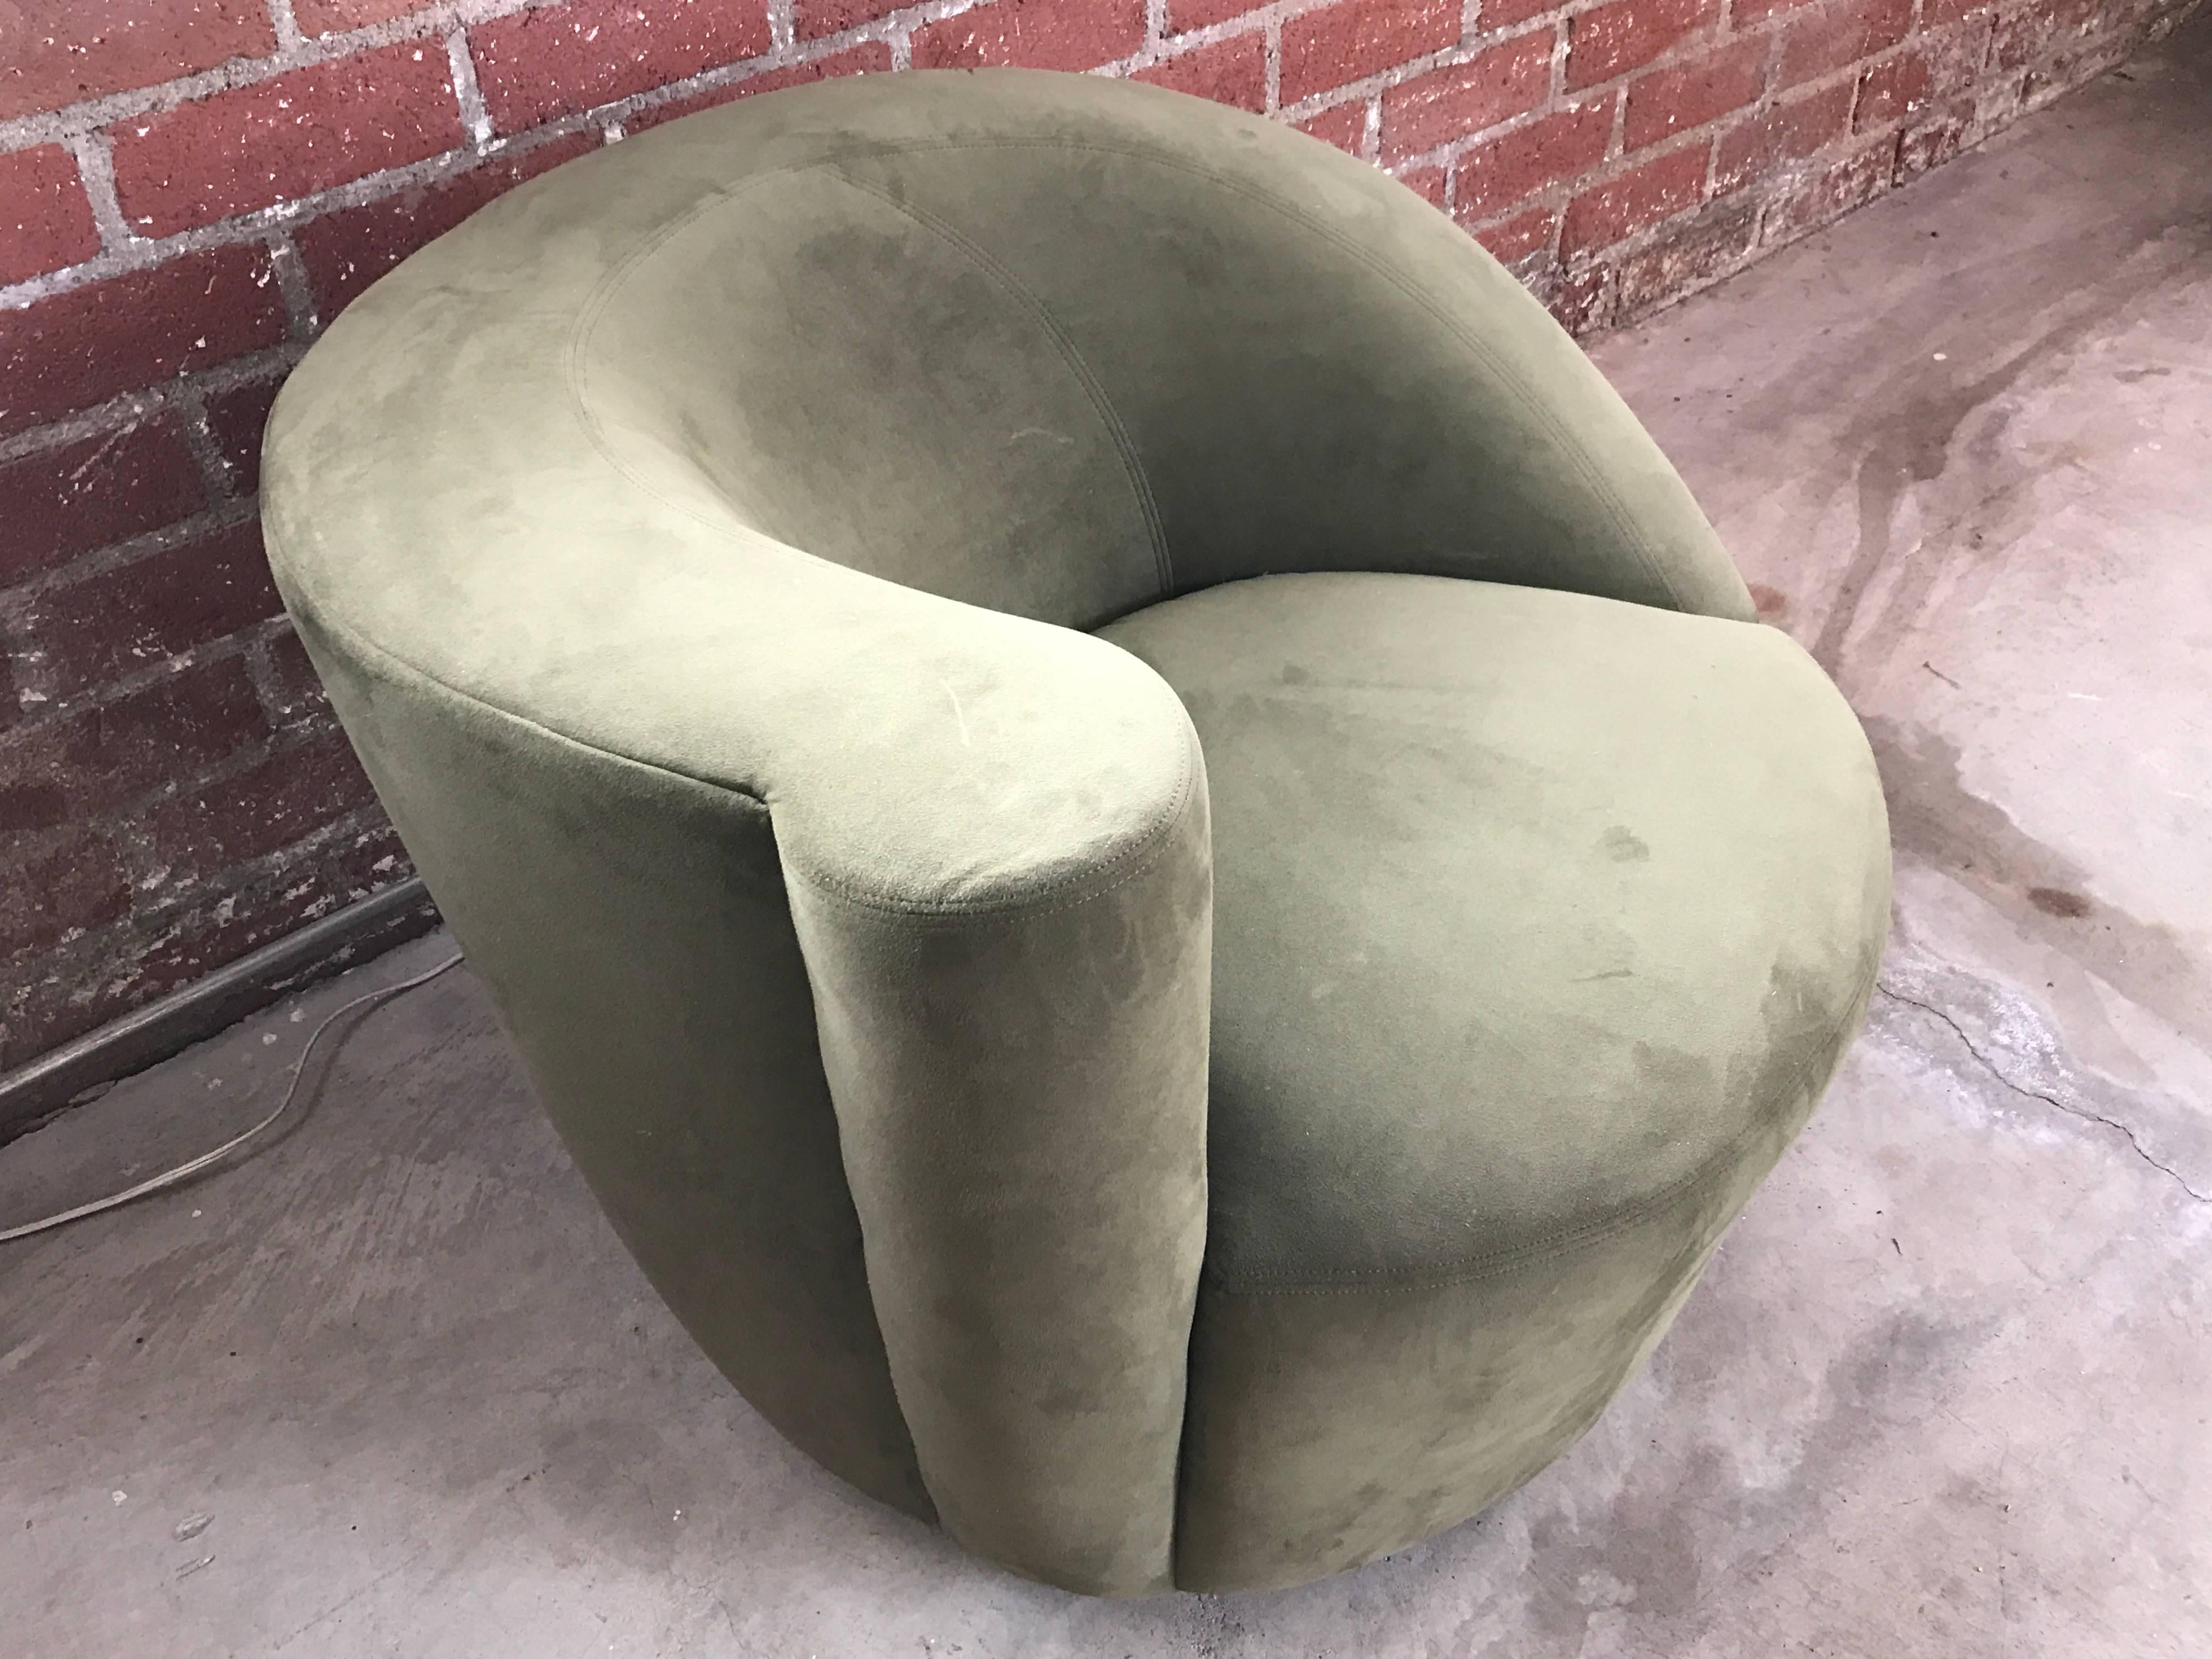 This pair of Classic Nautilus chairs designed by Vladimir Kagan for Directional feature a sloping, asymmetrical backrests and are upholstered in olive green. The chairs rest on swivel bases on a return which allow them to rotate 180 degrees and then